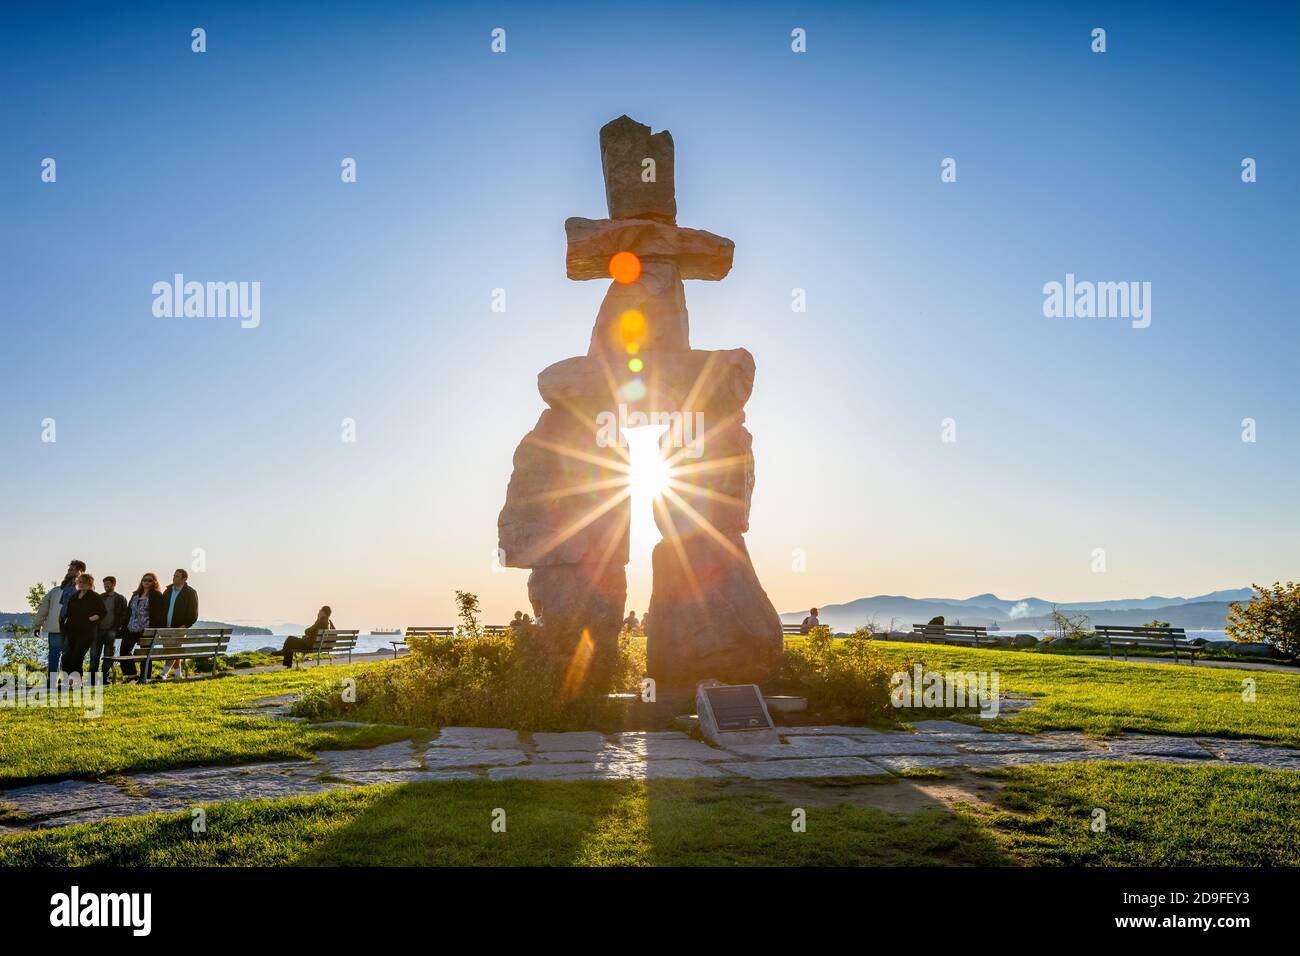 Inukshuk, an outdoor inuksuk by Alvin Kanak, installed at Vancouver's English Bay, in British Columbia, Canada. Stock Photo